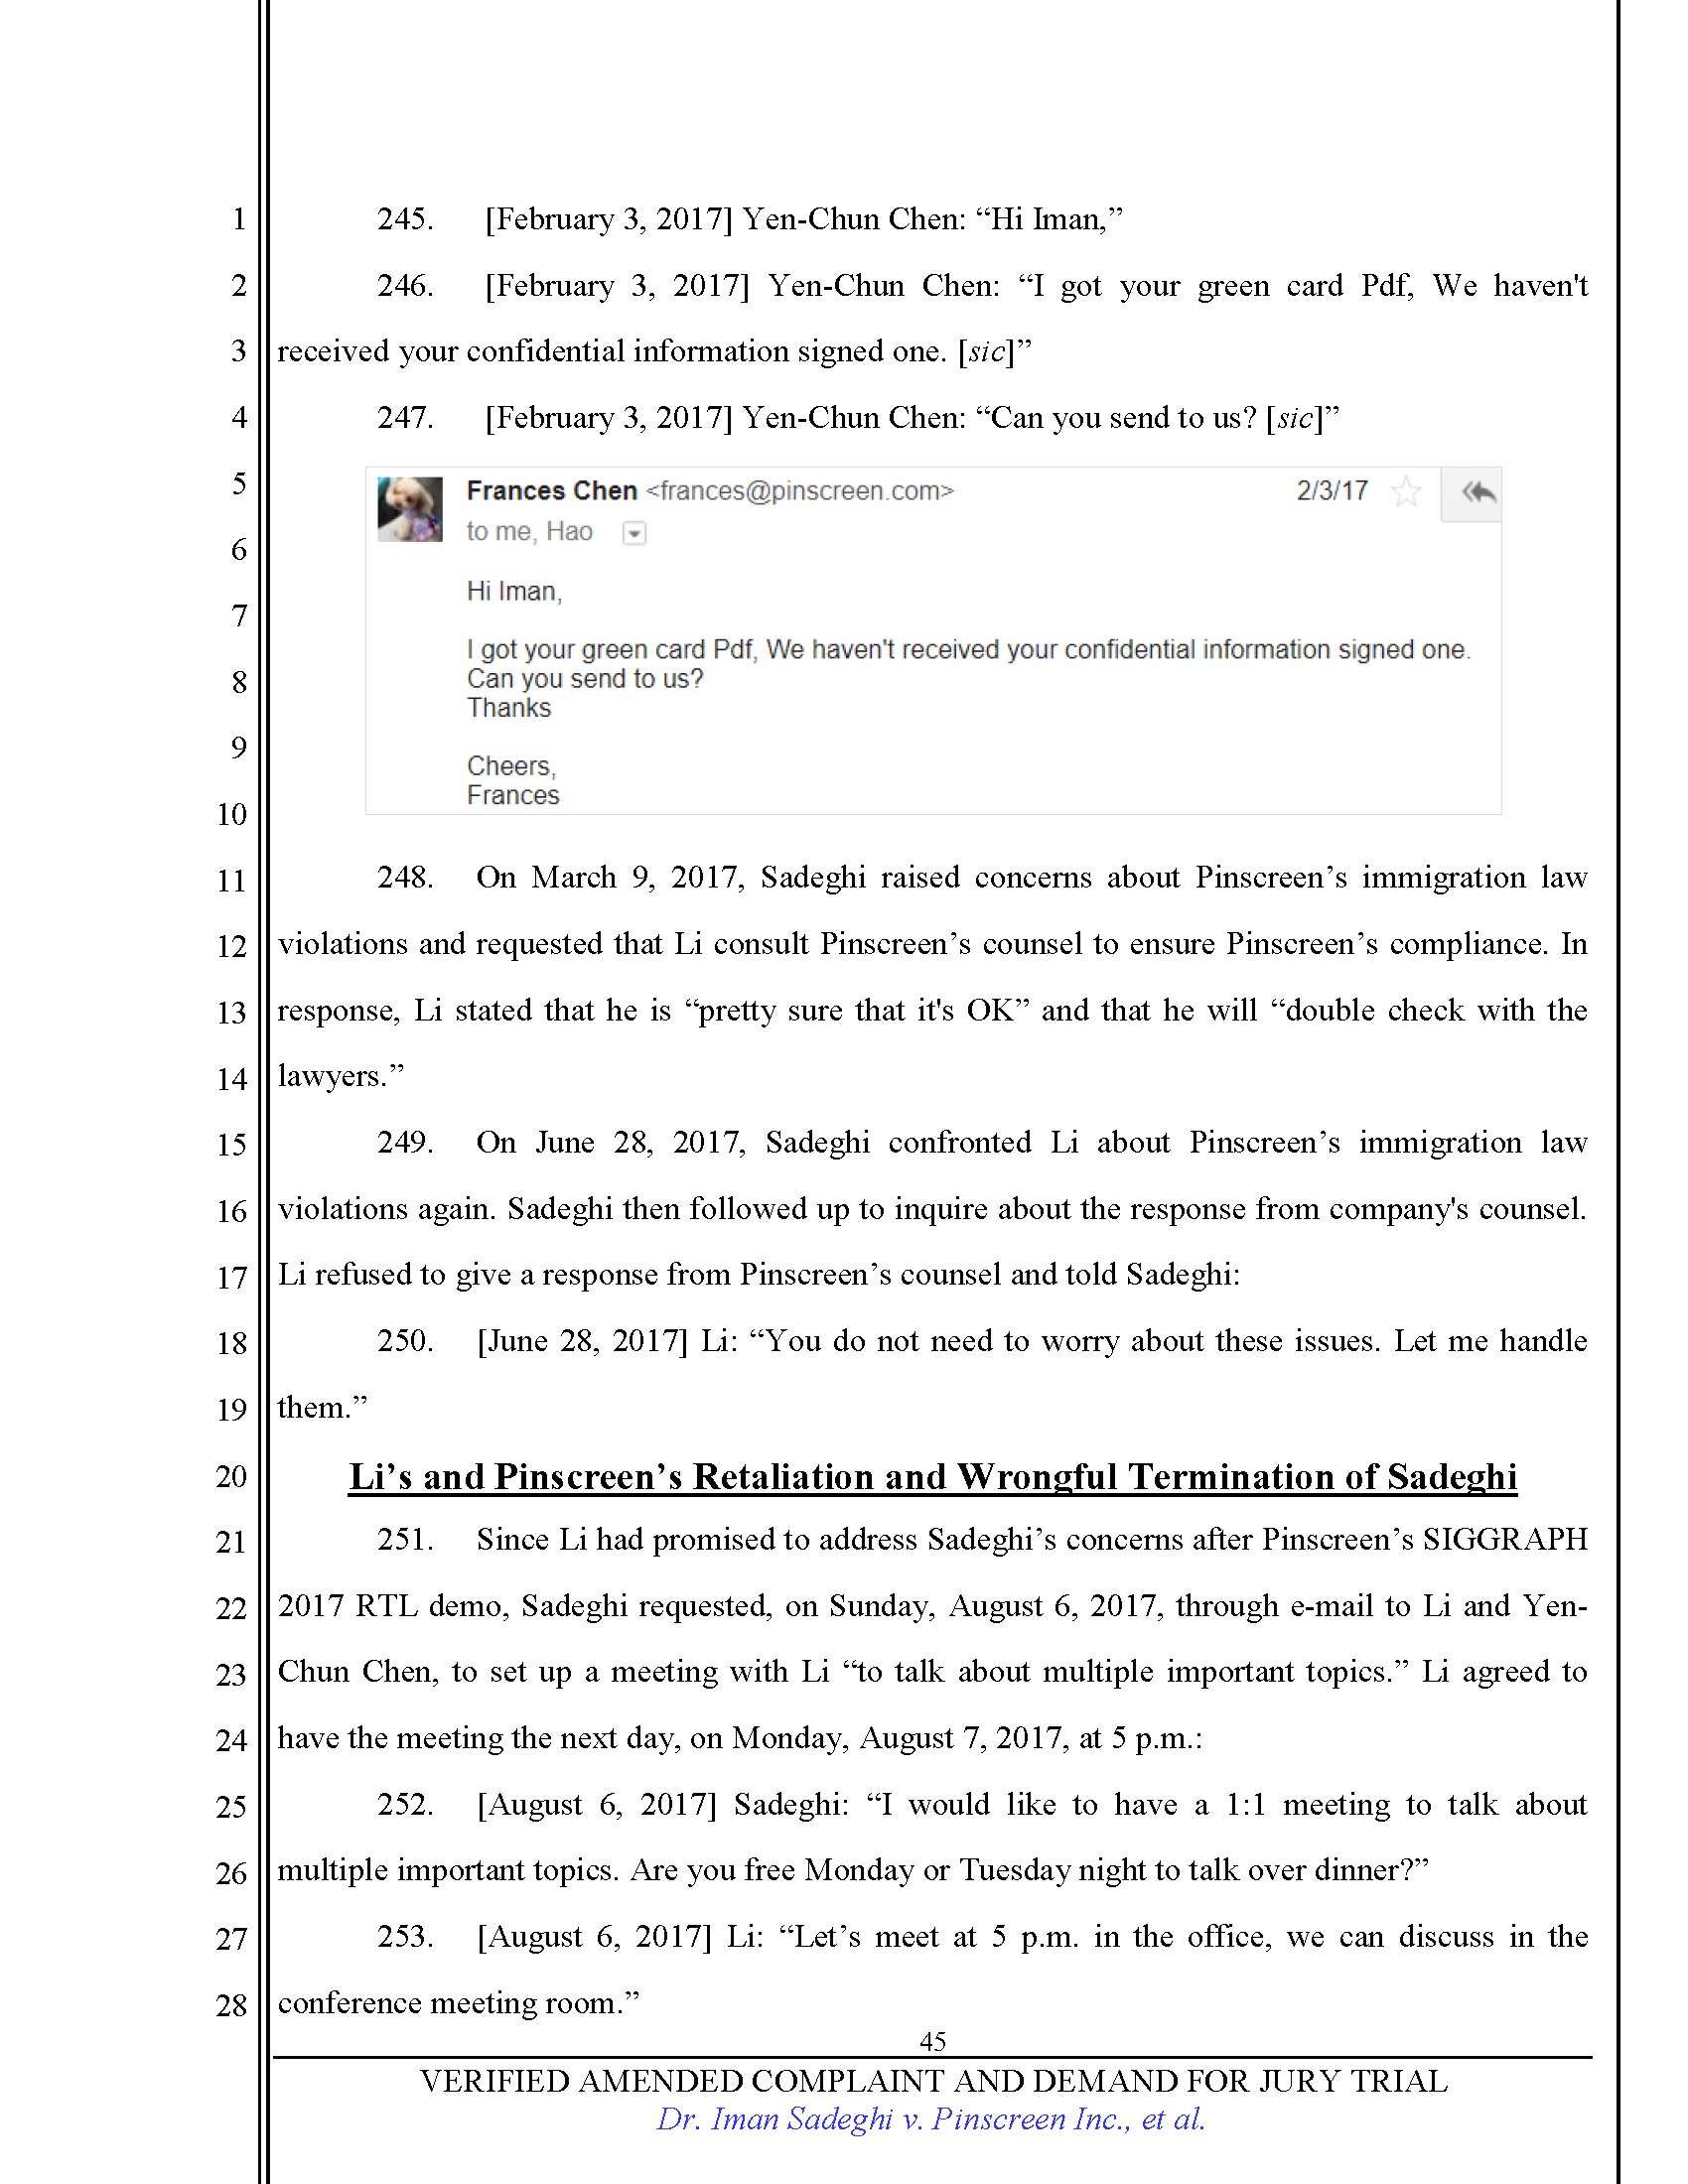 First Amended Complaint (FAC) Page 45